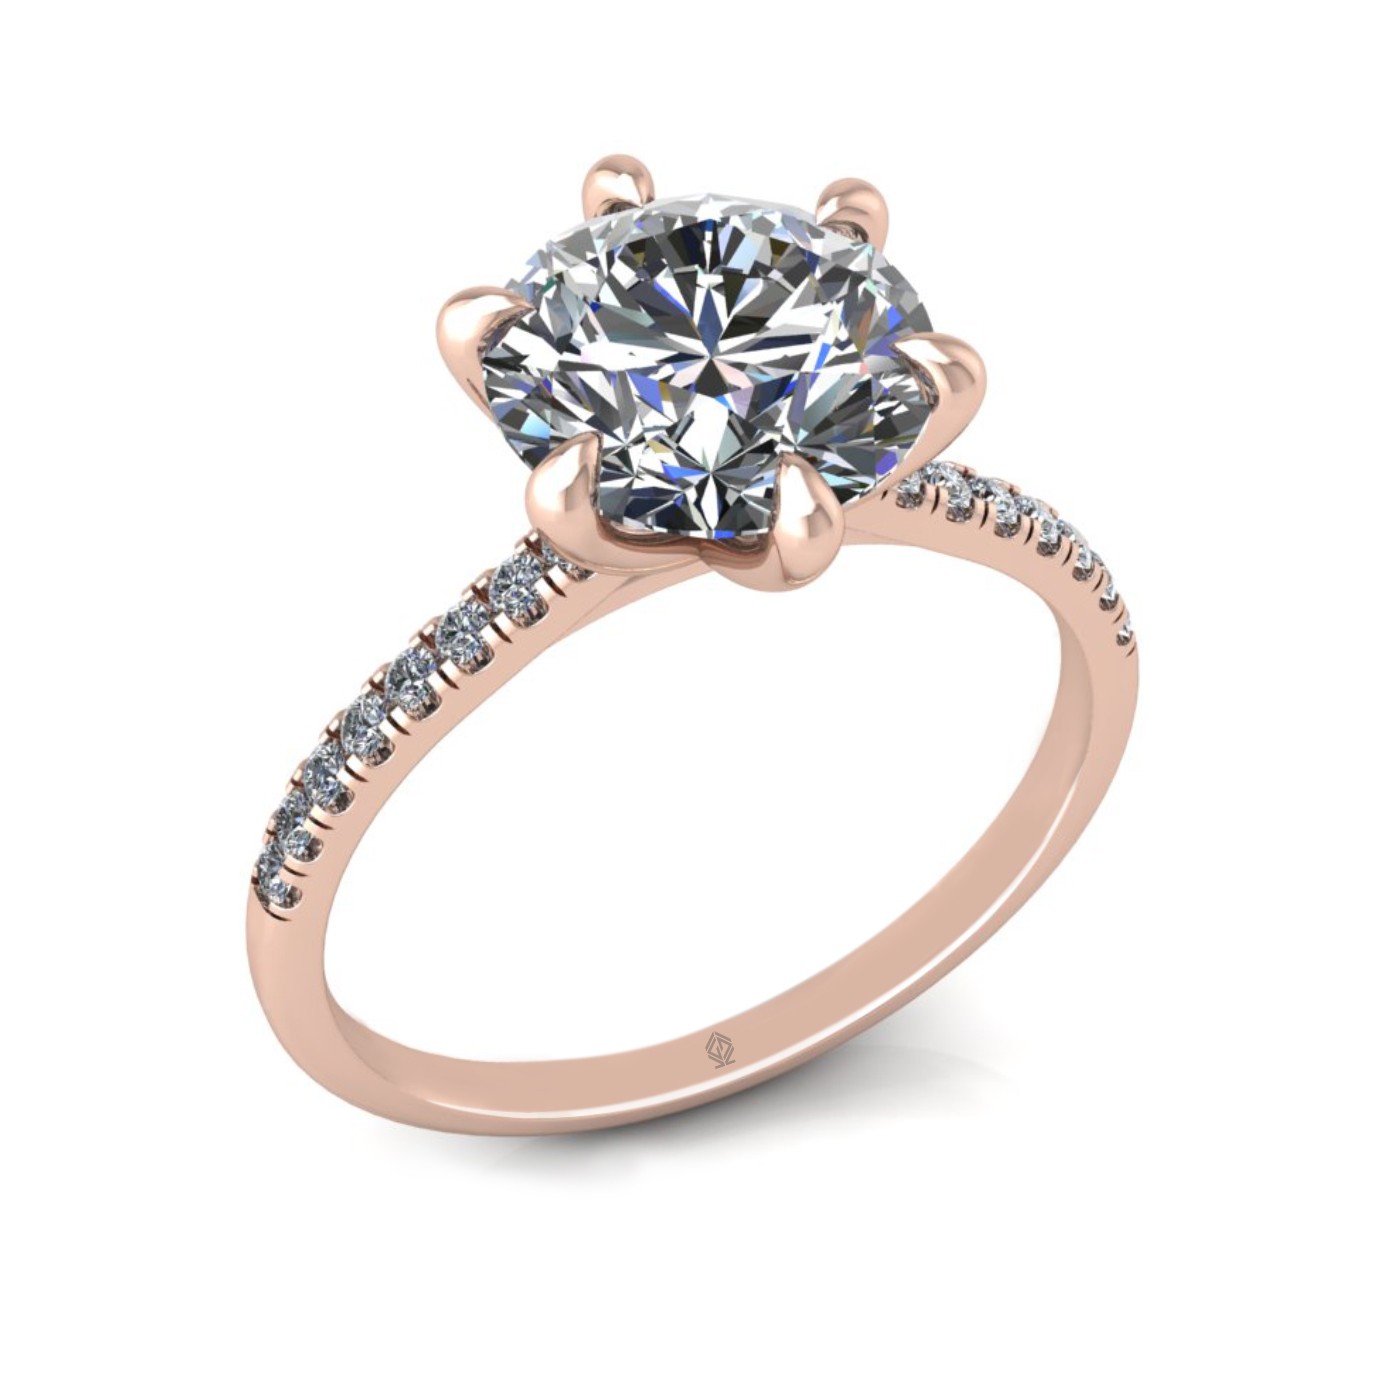 18k rose gold 2,50 ct 6 prongs round cut diamond engagement ring with whisper thin pavÉ set band